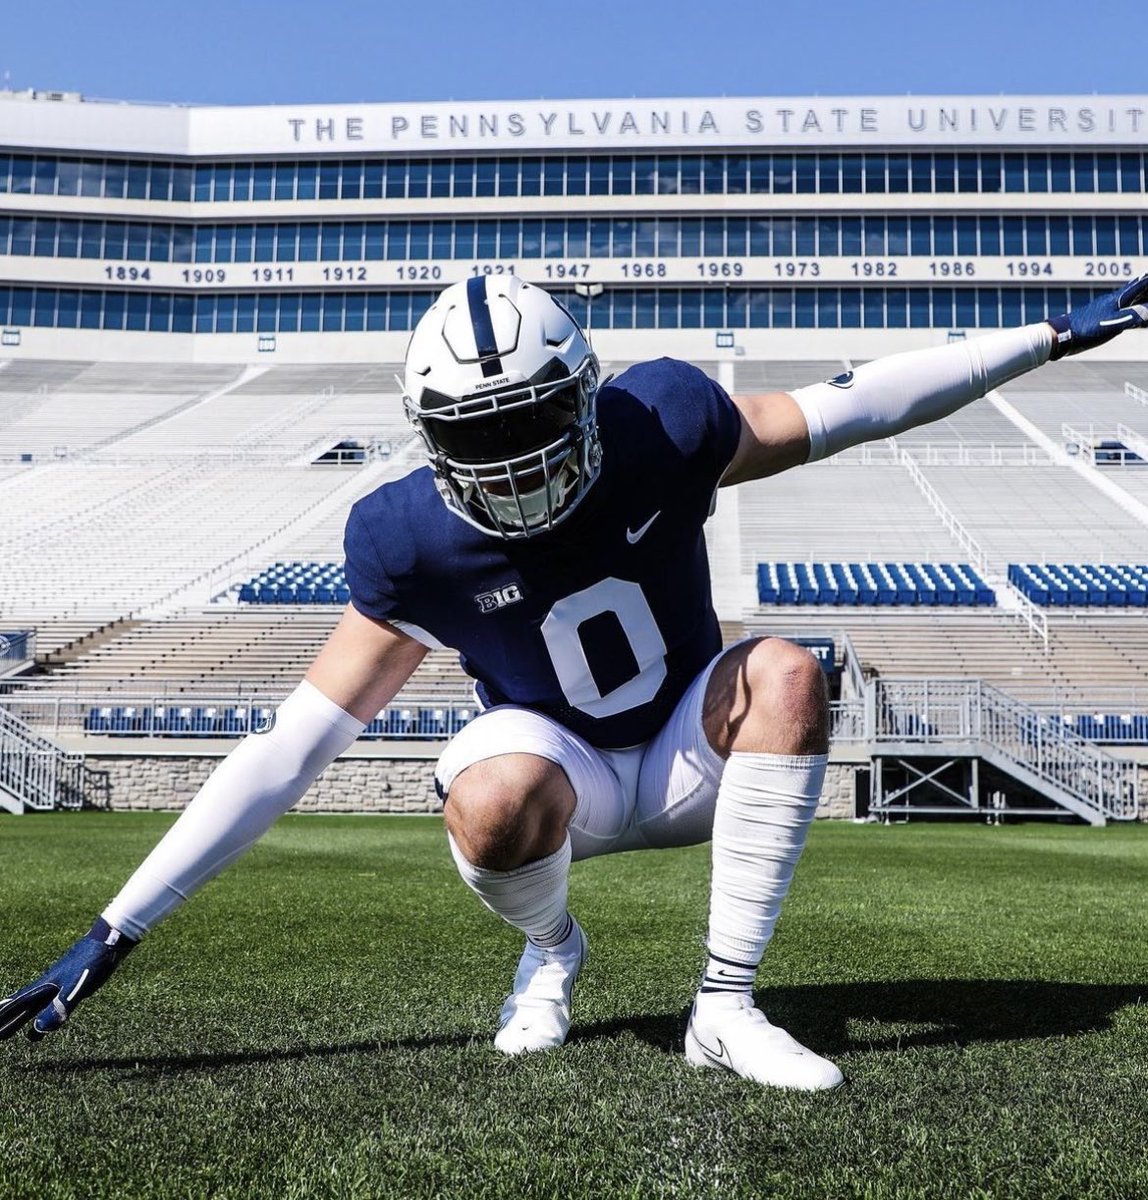 Liam Andrews has signed with Penn State. Andrews is a four-star, 6-foot-5, 260-pound lineman from the Dexter School in Brookline, Mass. He committed to Penn State in July. He plans on being a defensive lineman in college. nittanysportsnow.com/2023/12/penn-s…